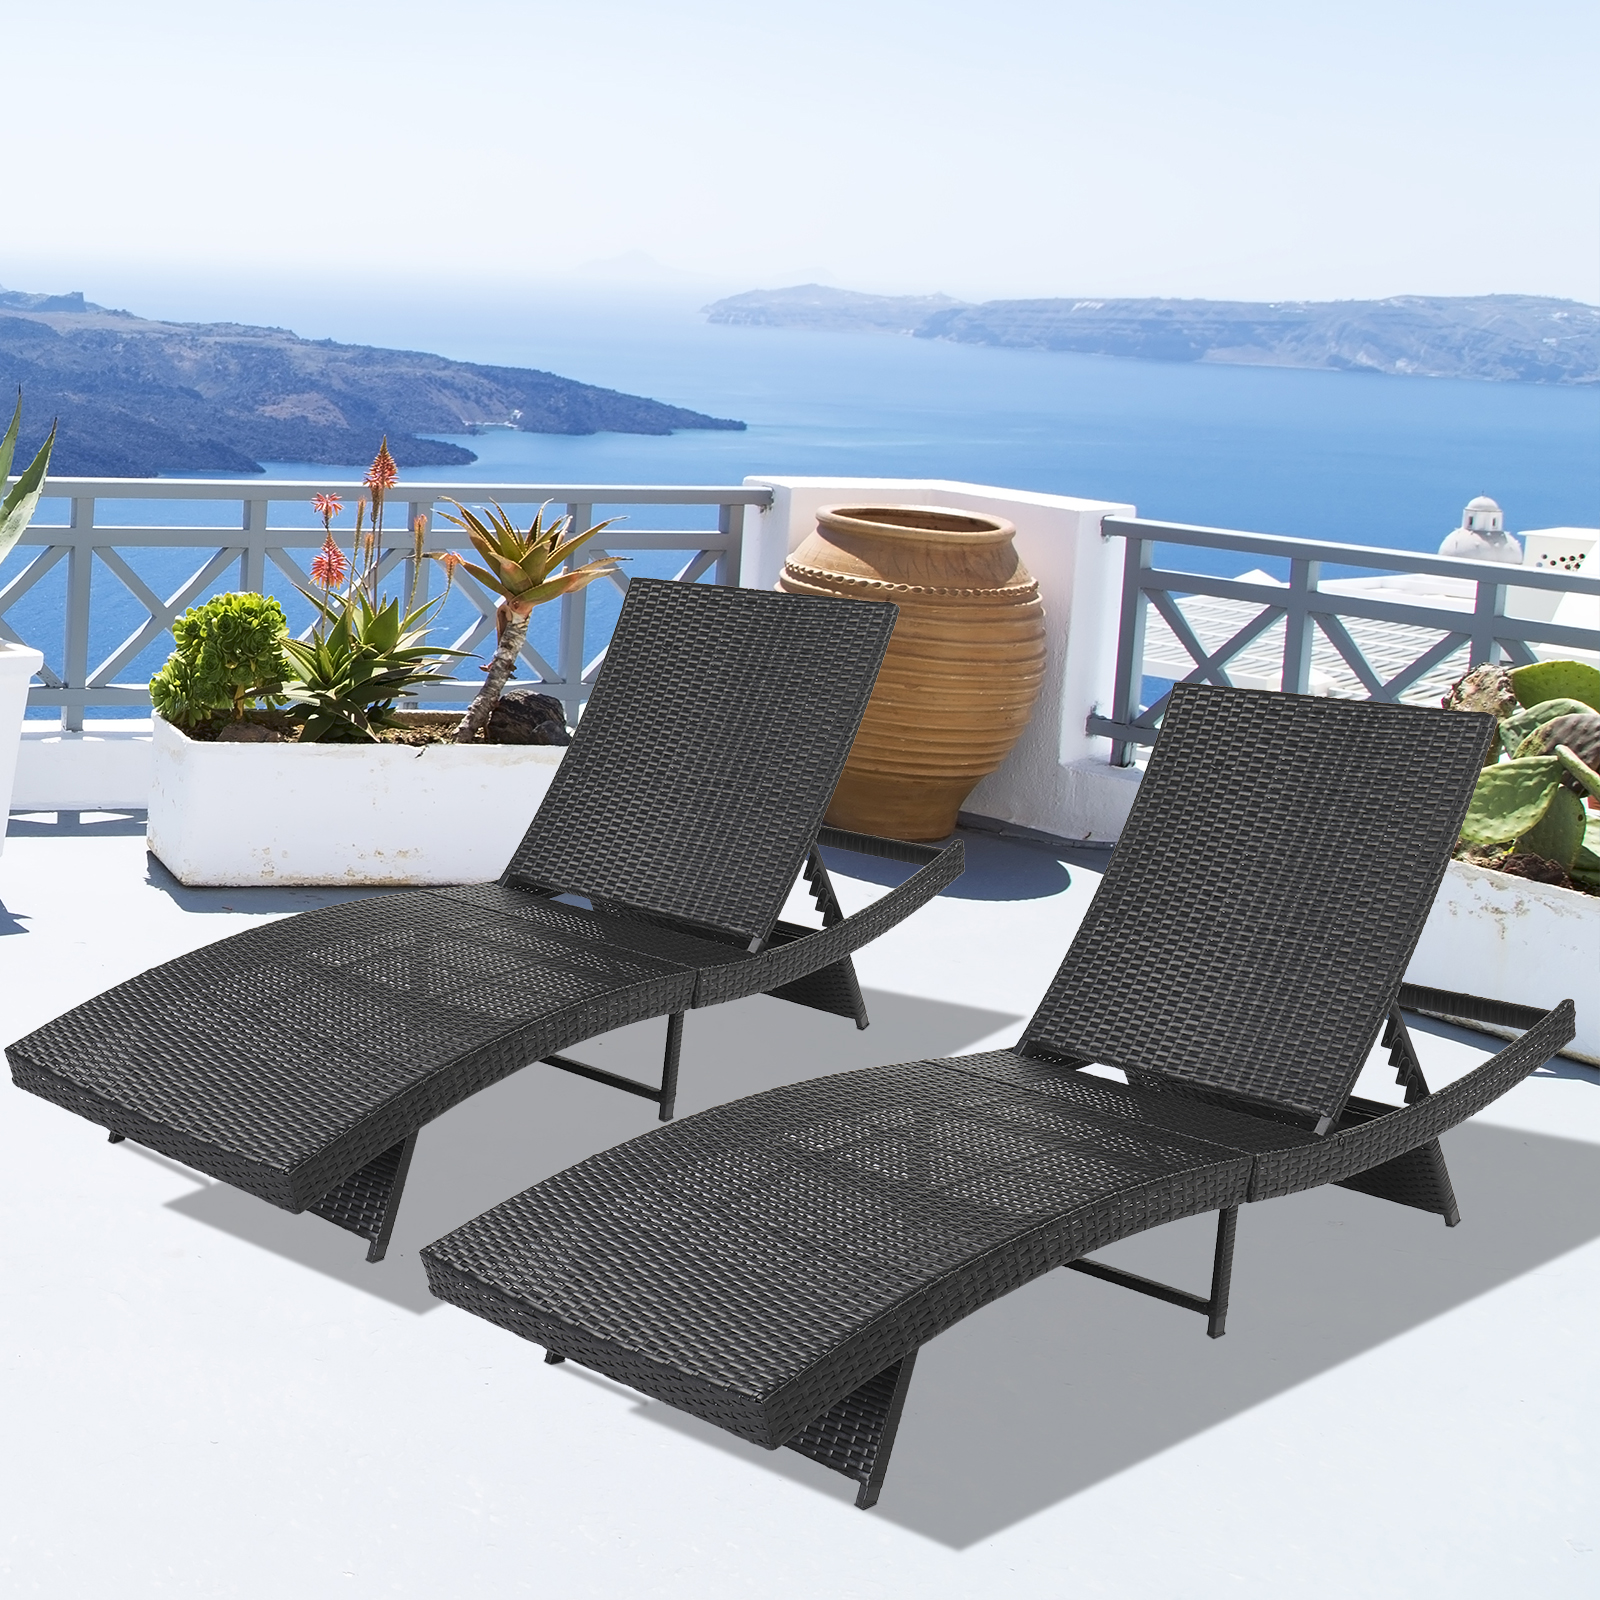 Patio Chaise Lounge Furniture, 5-Position Adjustable Cushioned Rattan Chaise, PE Wicker Backrest Lounger Chair, Suitable for Pool Balcony Deck Yard Garden, B33 - image 4 of 9